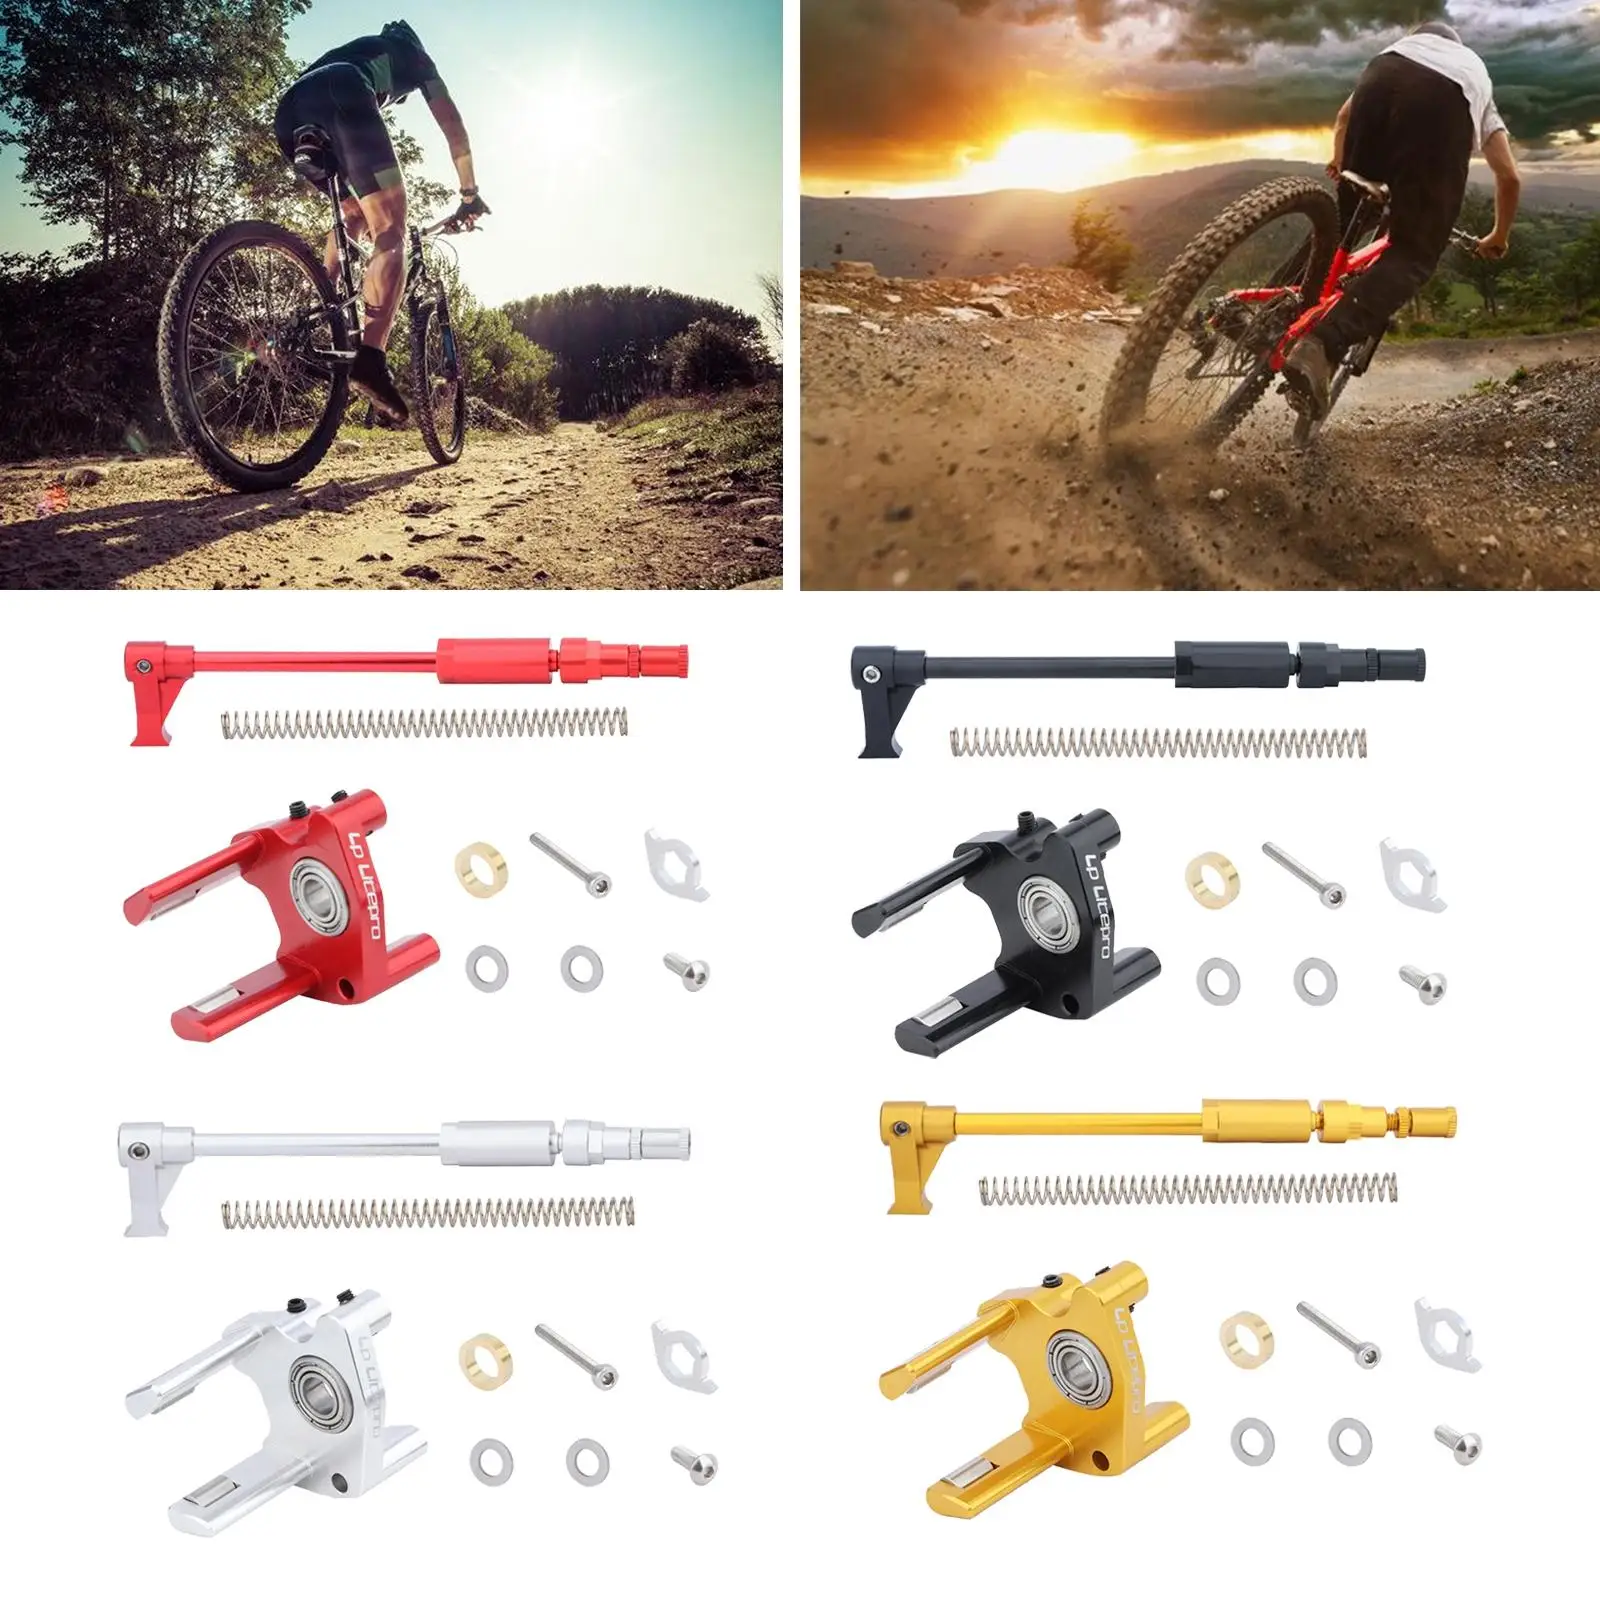 Lightweight Derailleur Set Cycling Parts with Spring Gear Shifter Easy Install for Folding Bike Compatible 2-7 Speeds